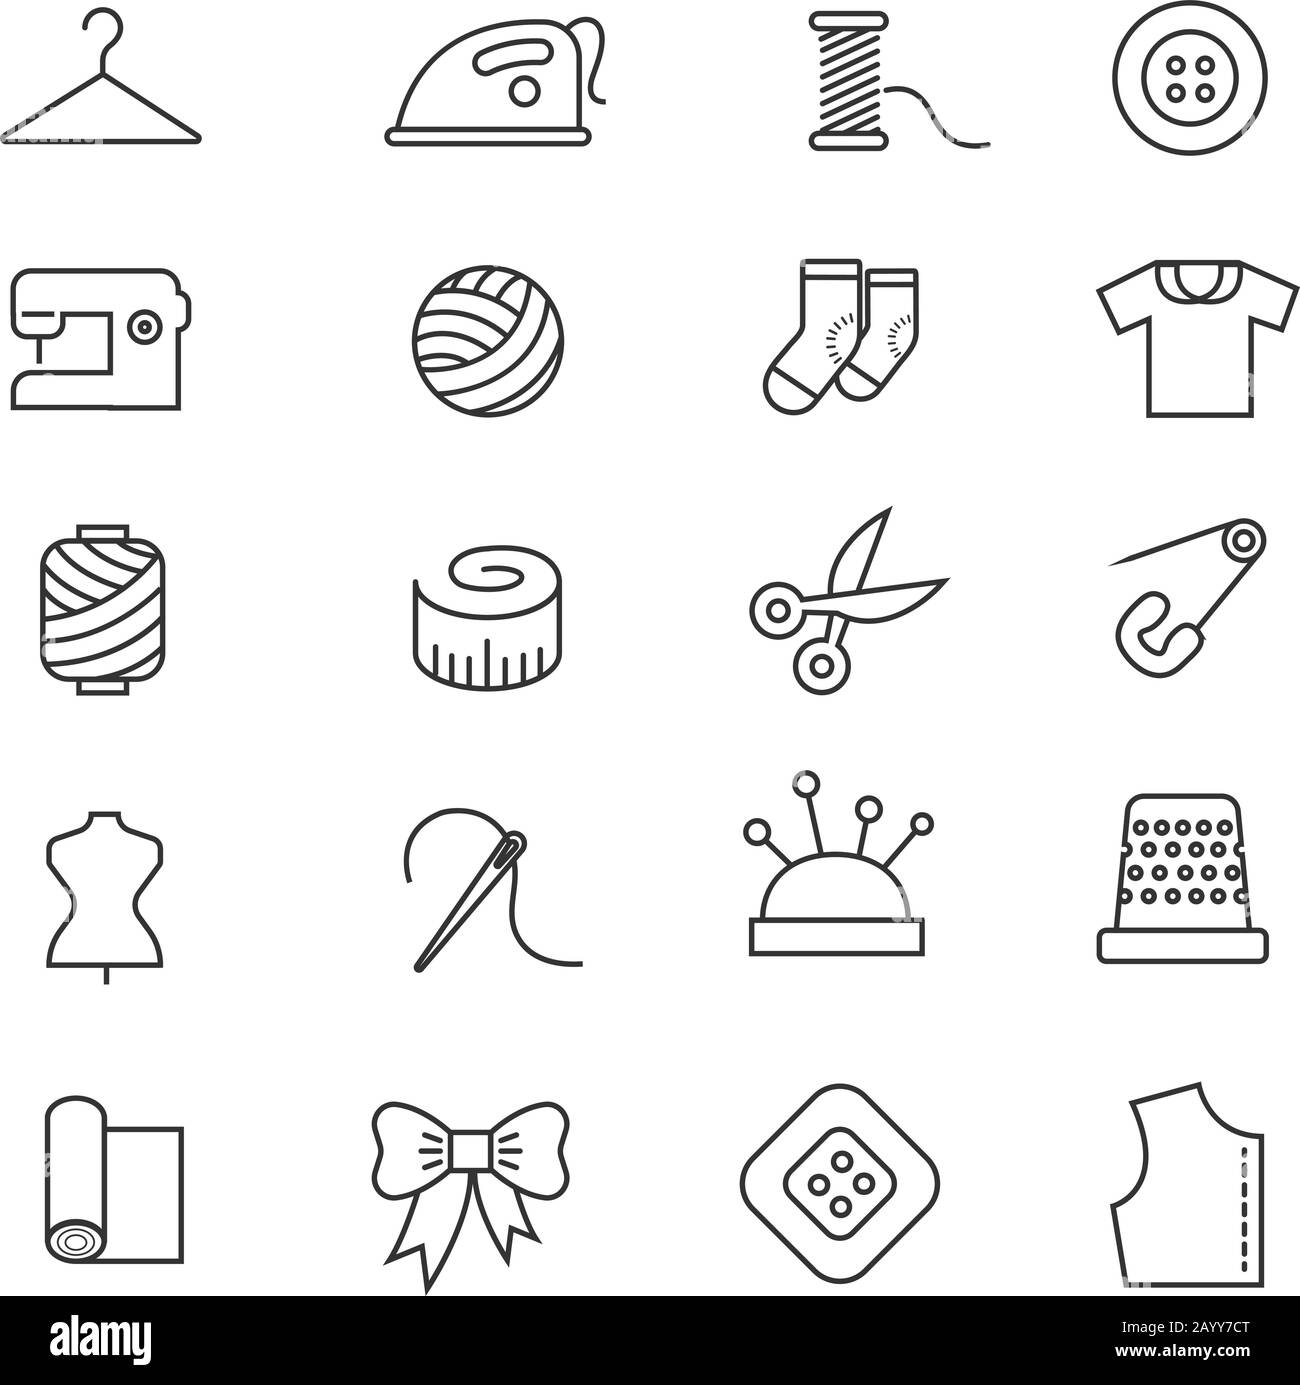 Thin lines fabric, sewing, tailor, knitting vector icons. Set of accessories for handmade hobby illustration Stock Vector